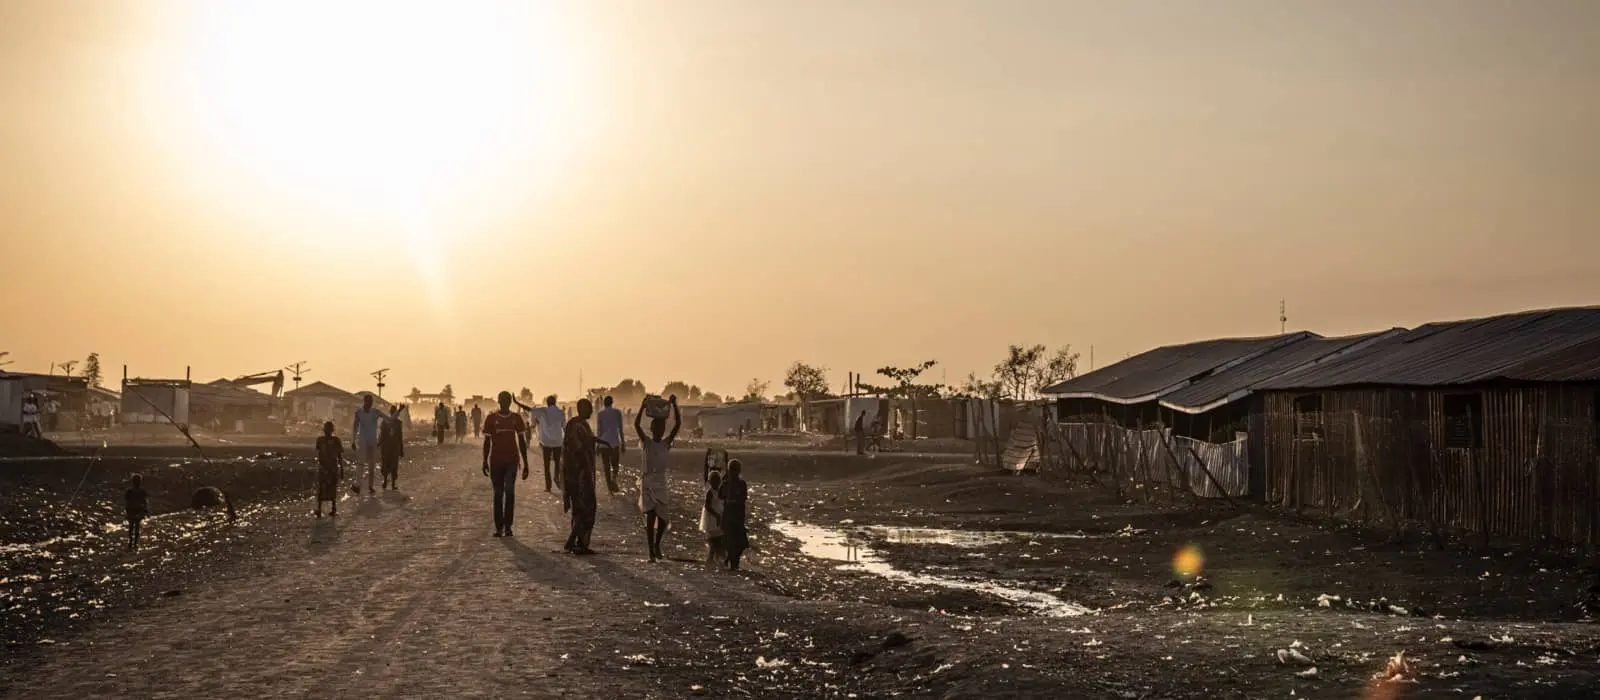 The sun sets at an IDP site in Bentiu in South Sudan's Unity State